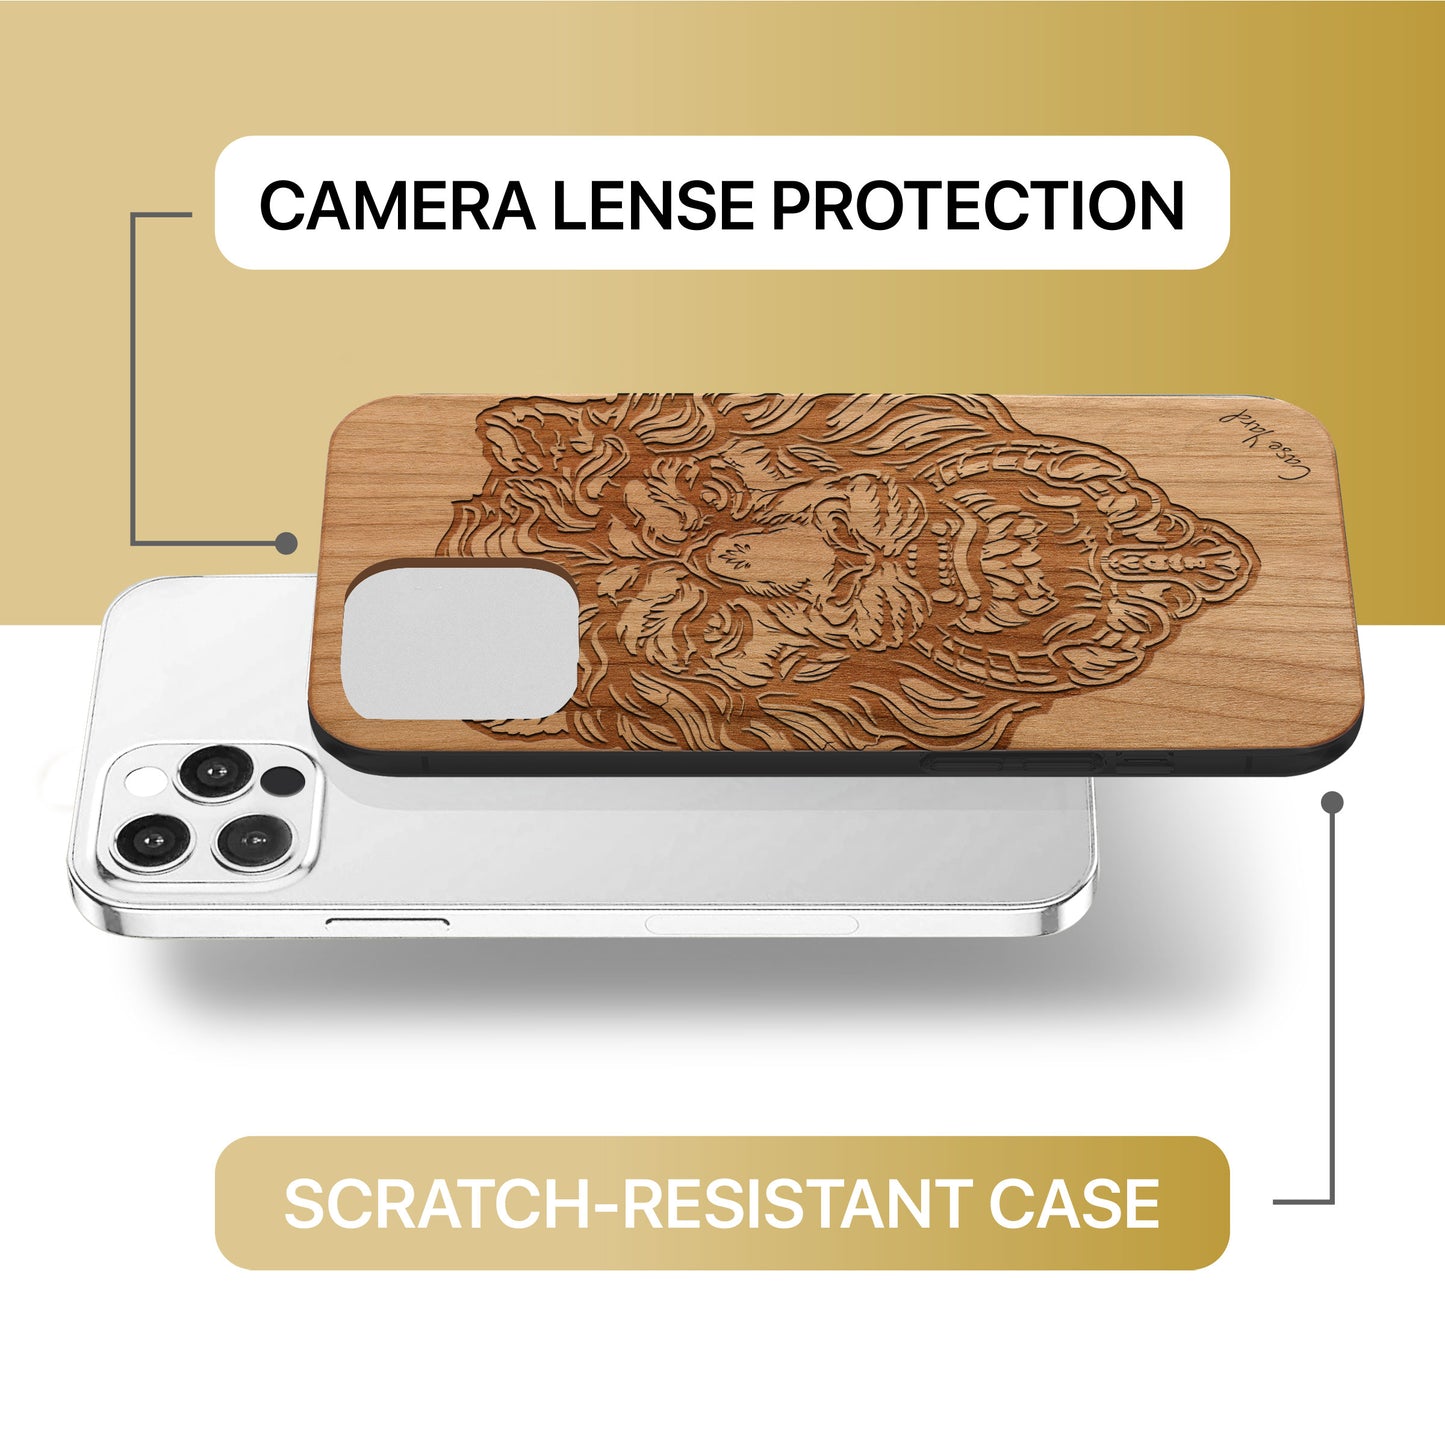 Wooden Cell Phone Case Cover, Laser Engraved case for iPhone & Samsung phone Victorian Lion Design